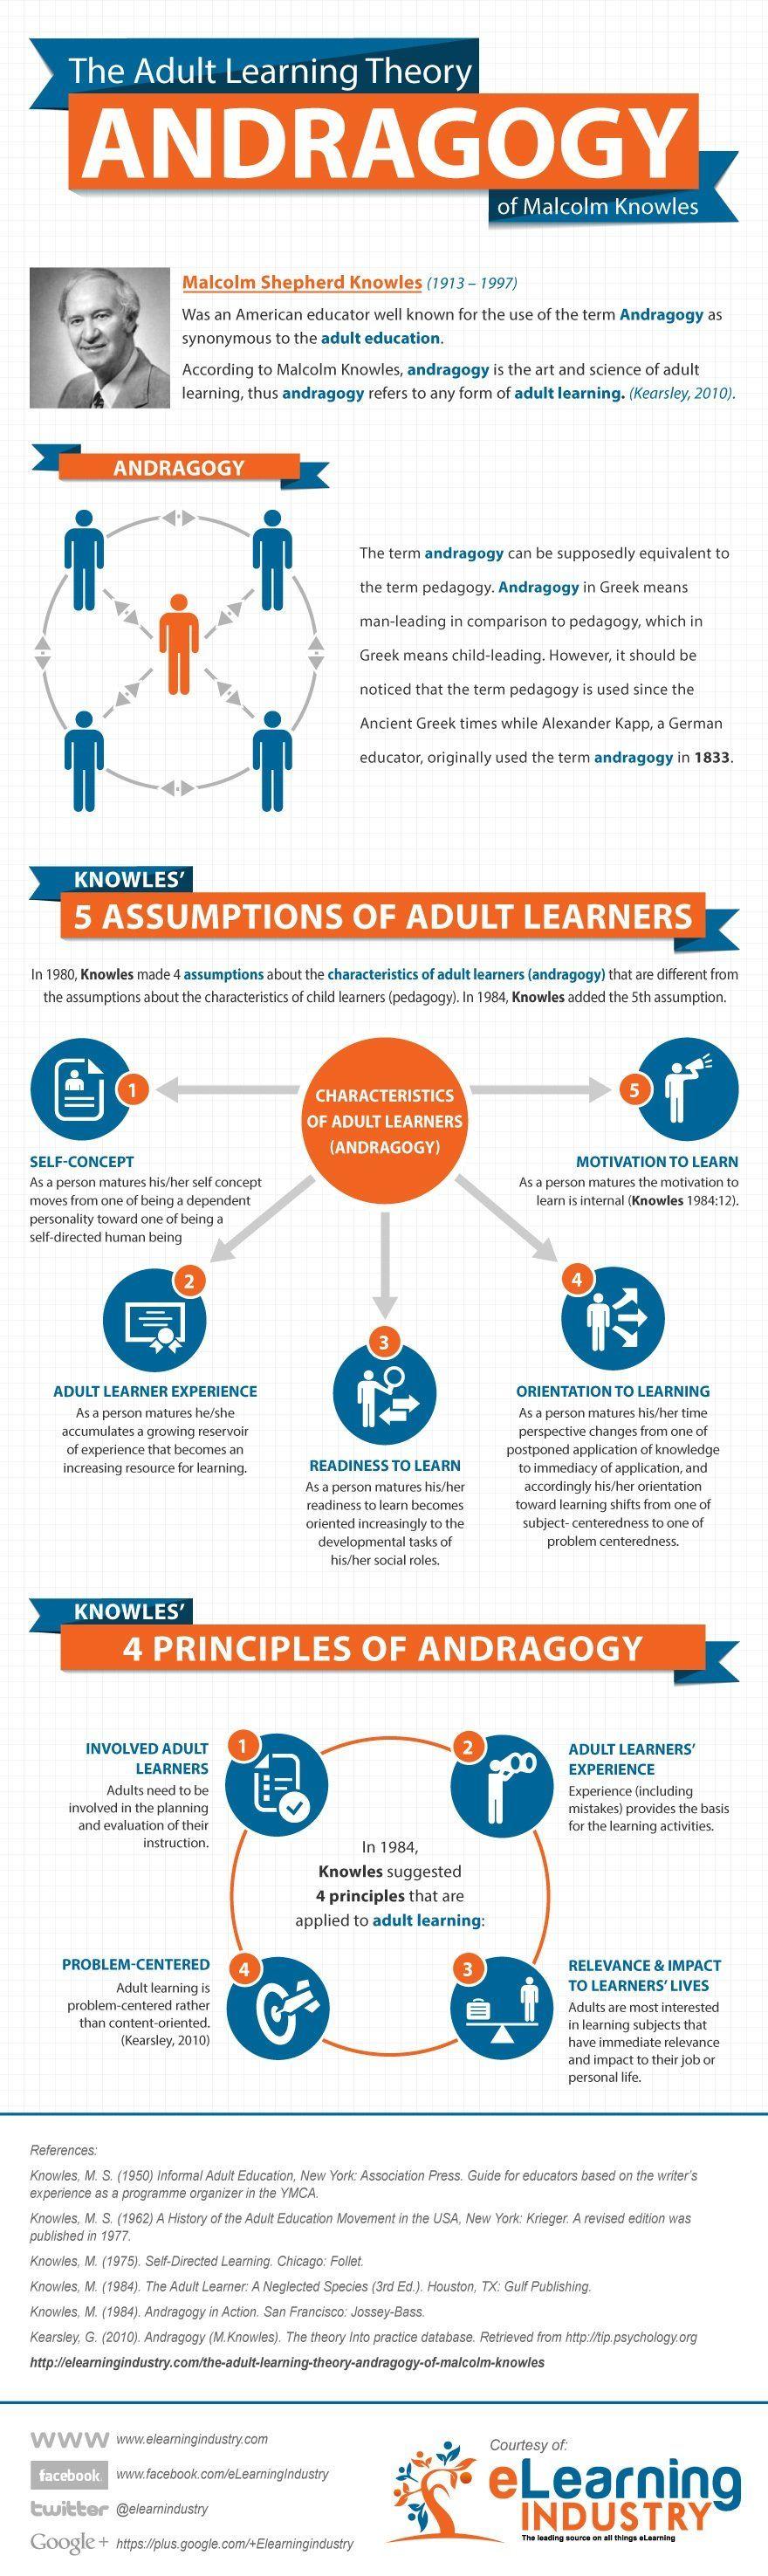 Theory of adult learning styles